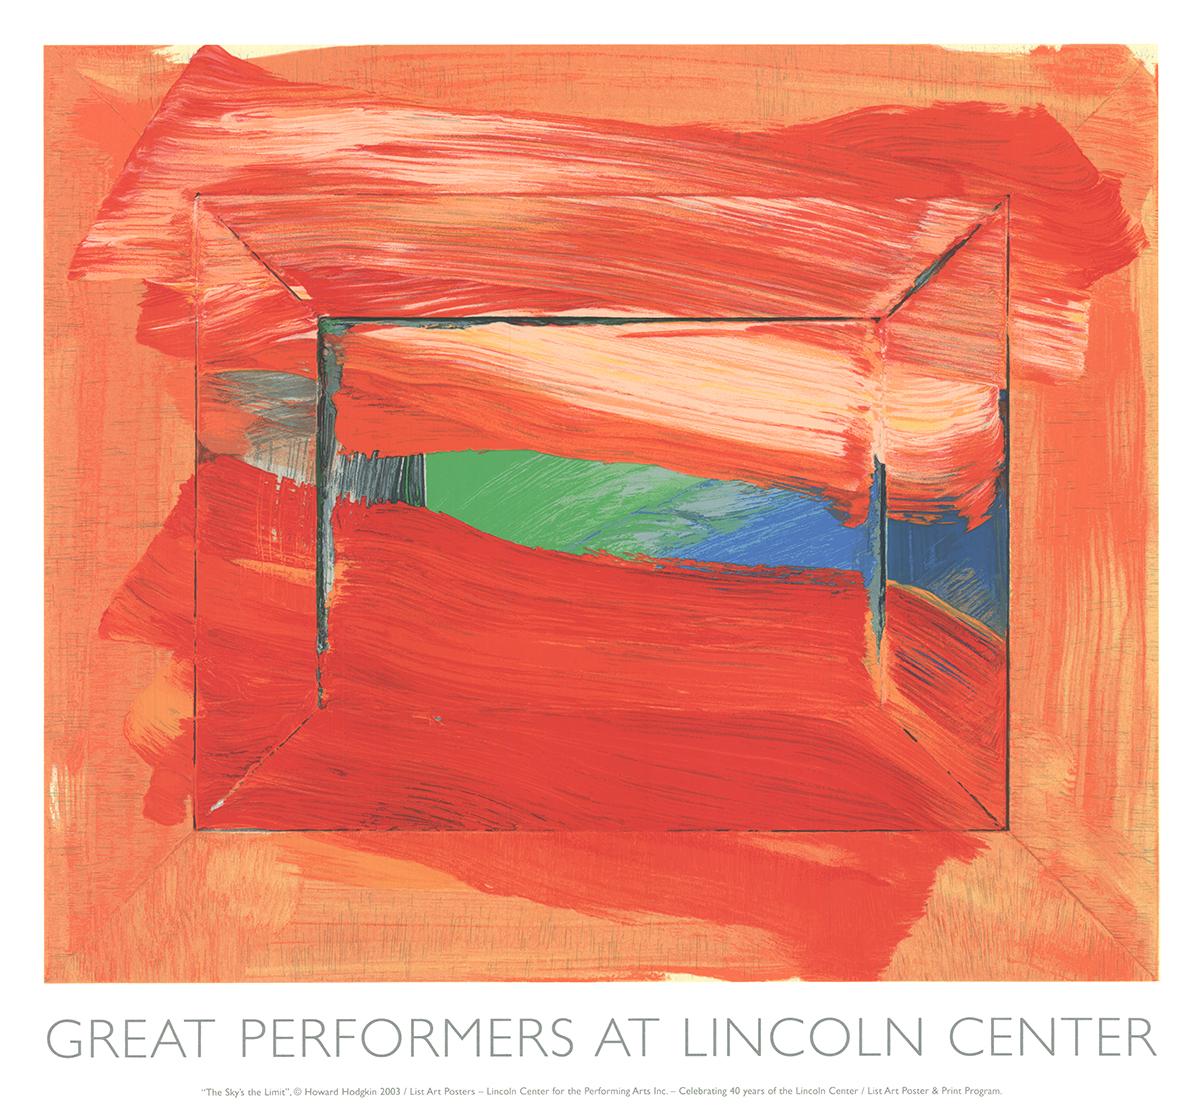 Limited edition serigraph poster after Howard Hodgkin published by the Lincoln Center for the Performing Arts in 2002.